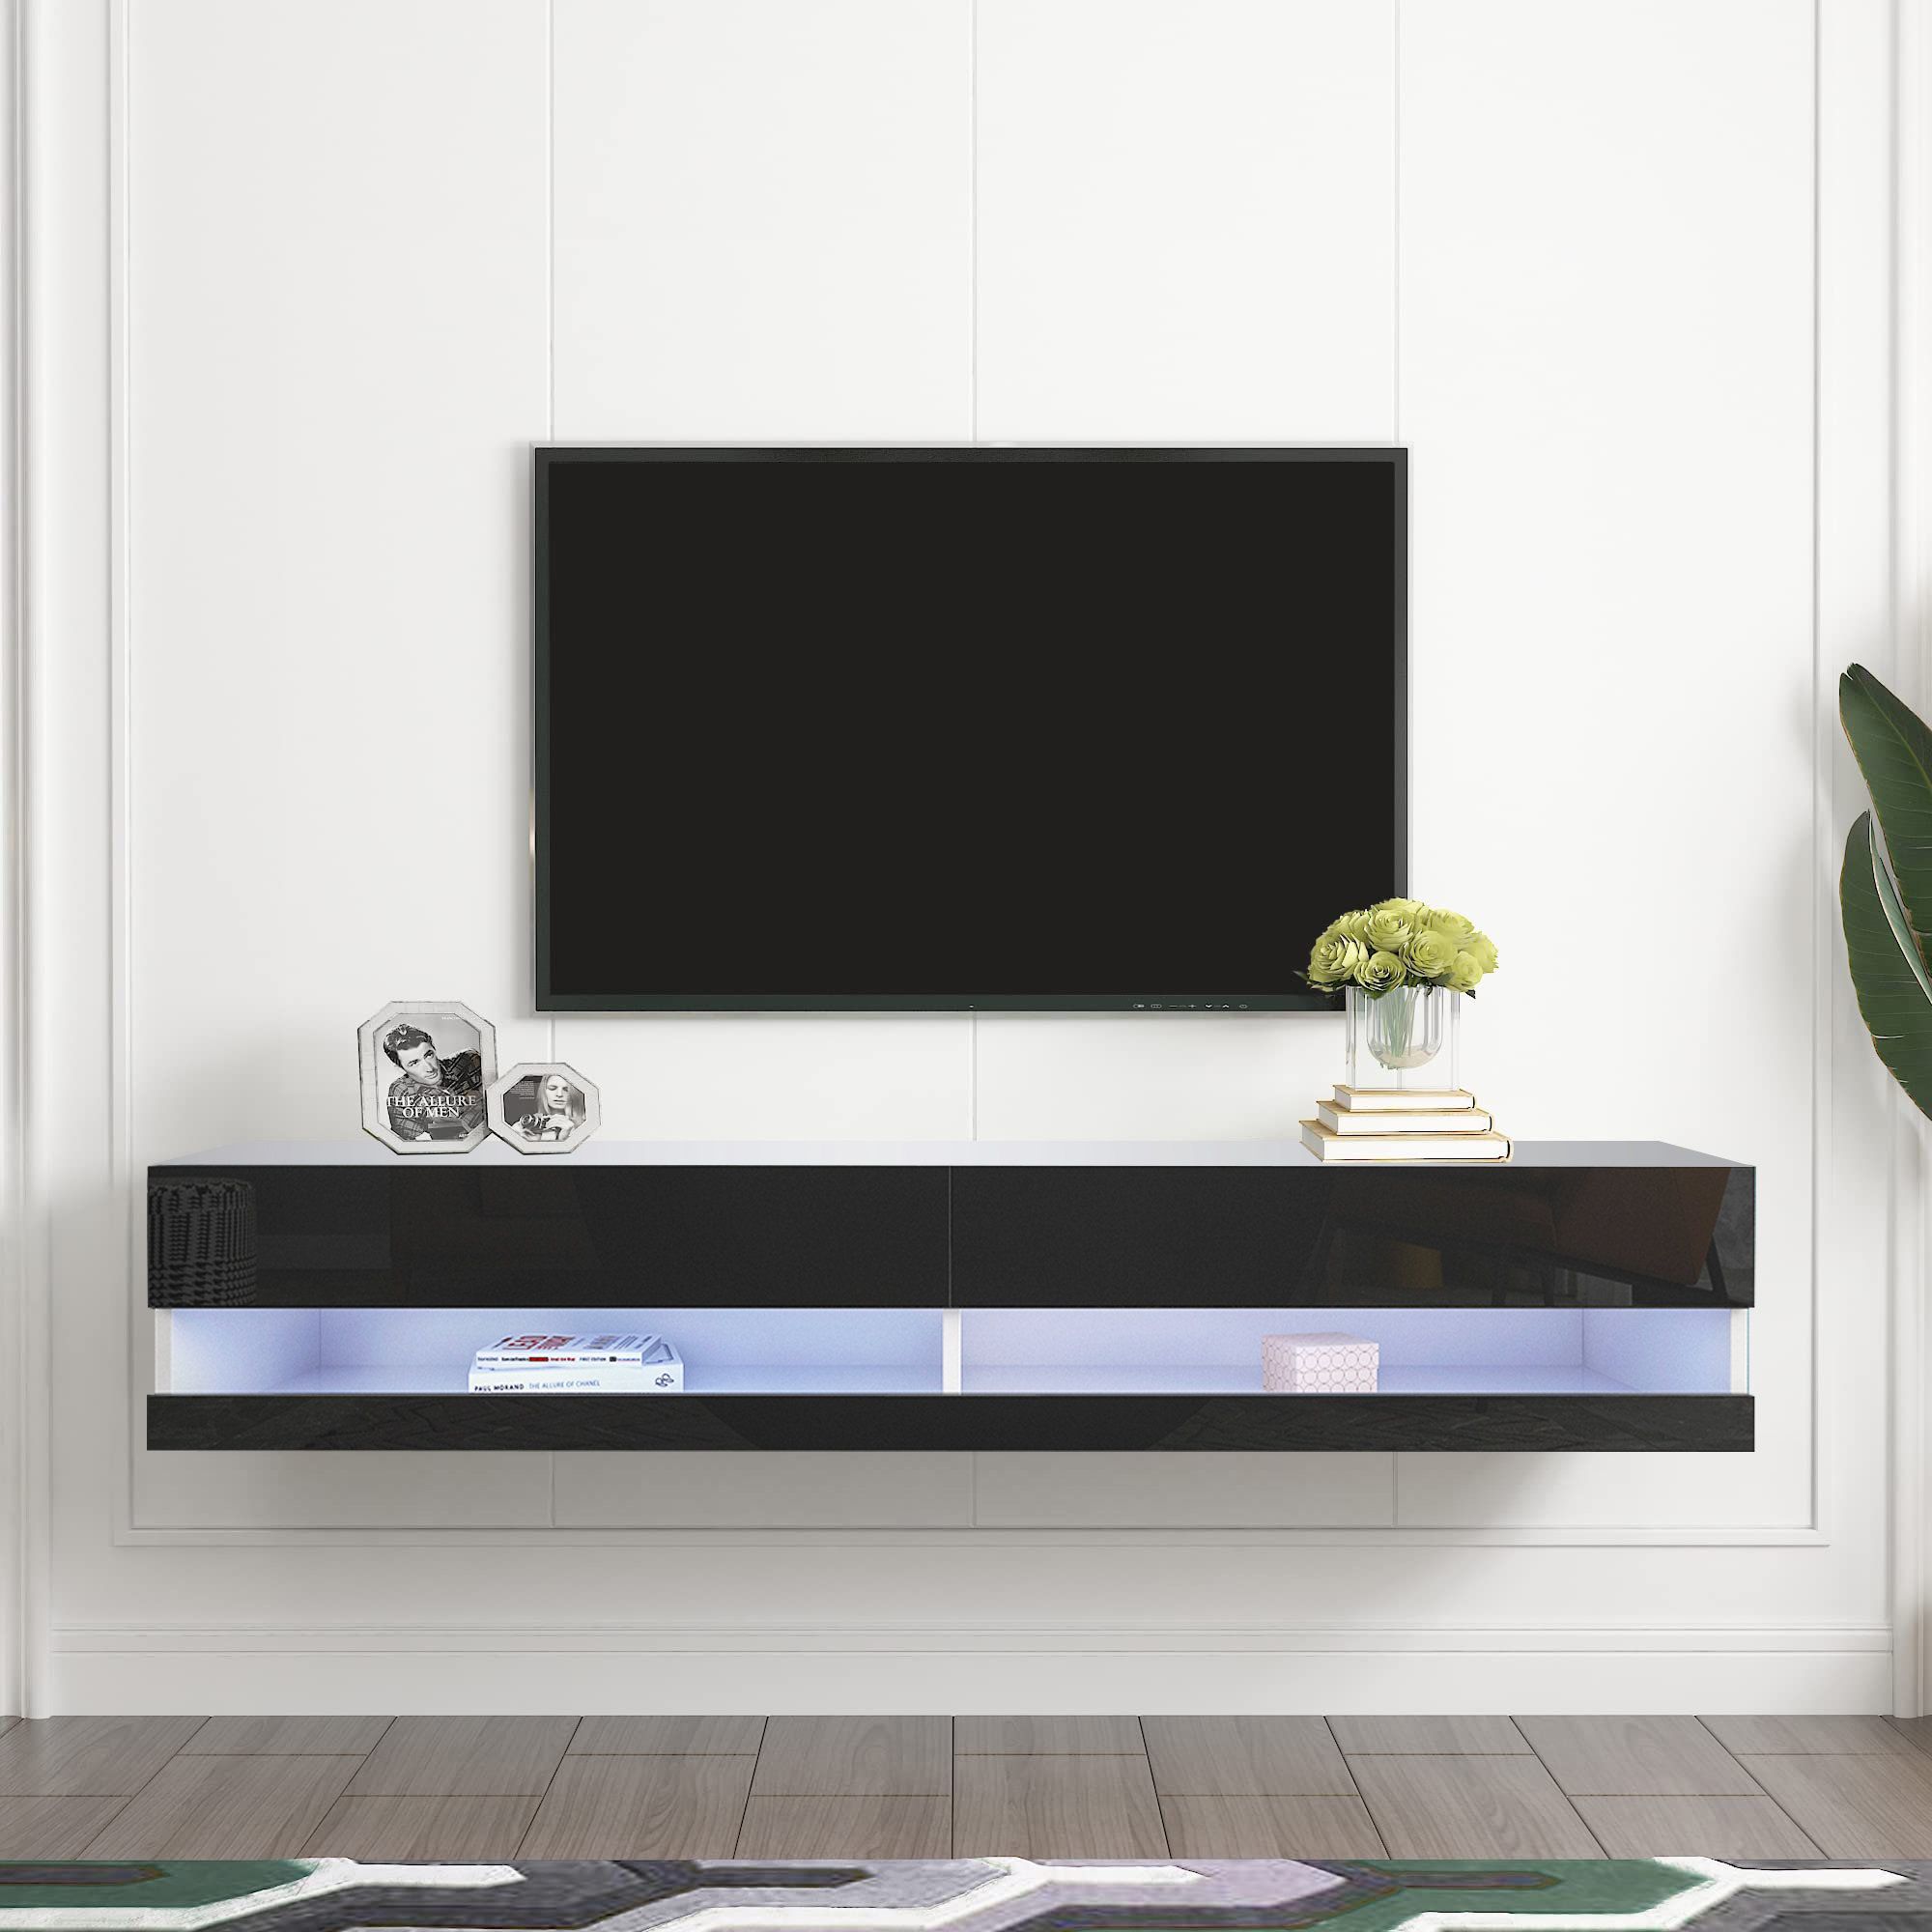 Ivy Bronx Floating Tv Stand Wall Mounted For 80"Tv, Entertainment Center  With 20 Colors Led Lights Add More Details (Optional) & Reviews | Wayfair With Regard To Wall Mounted Floating Tv Stands (Photo 5 of 15)